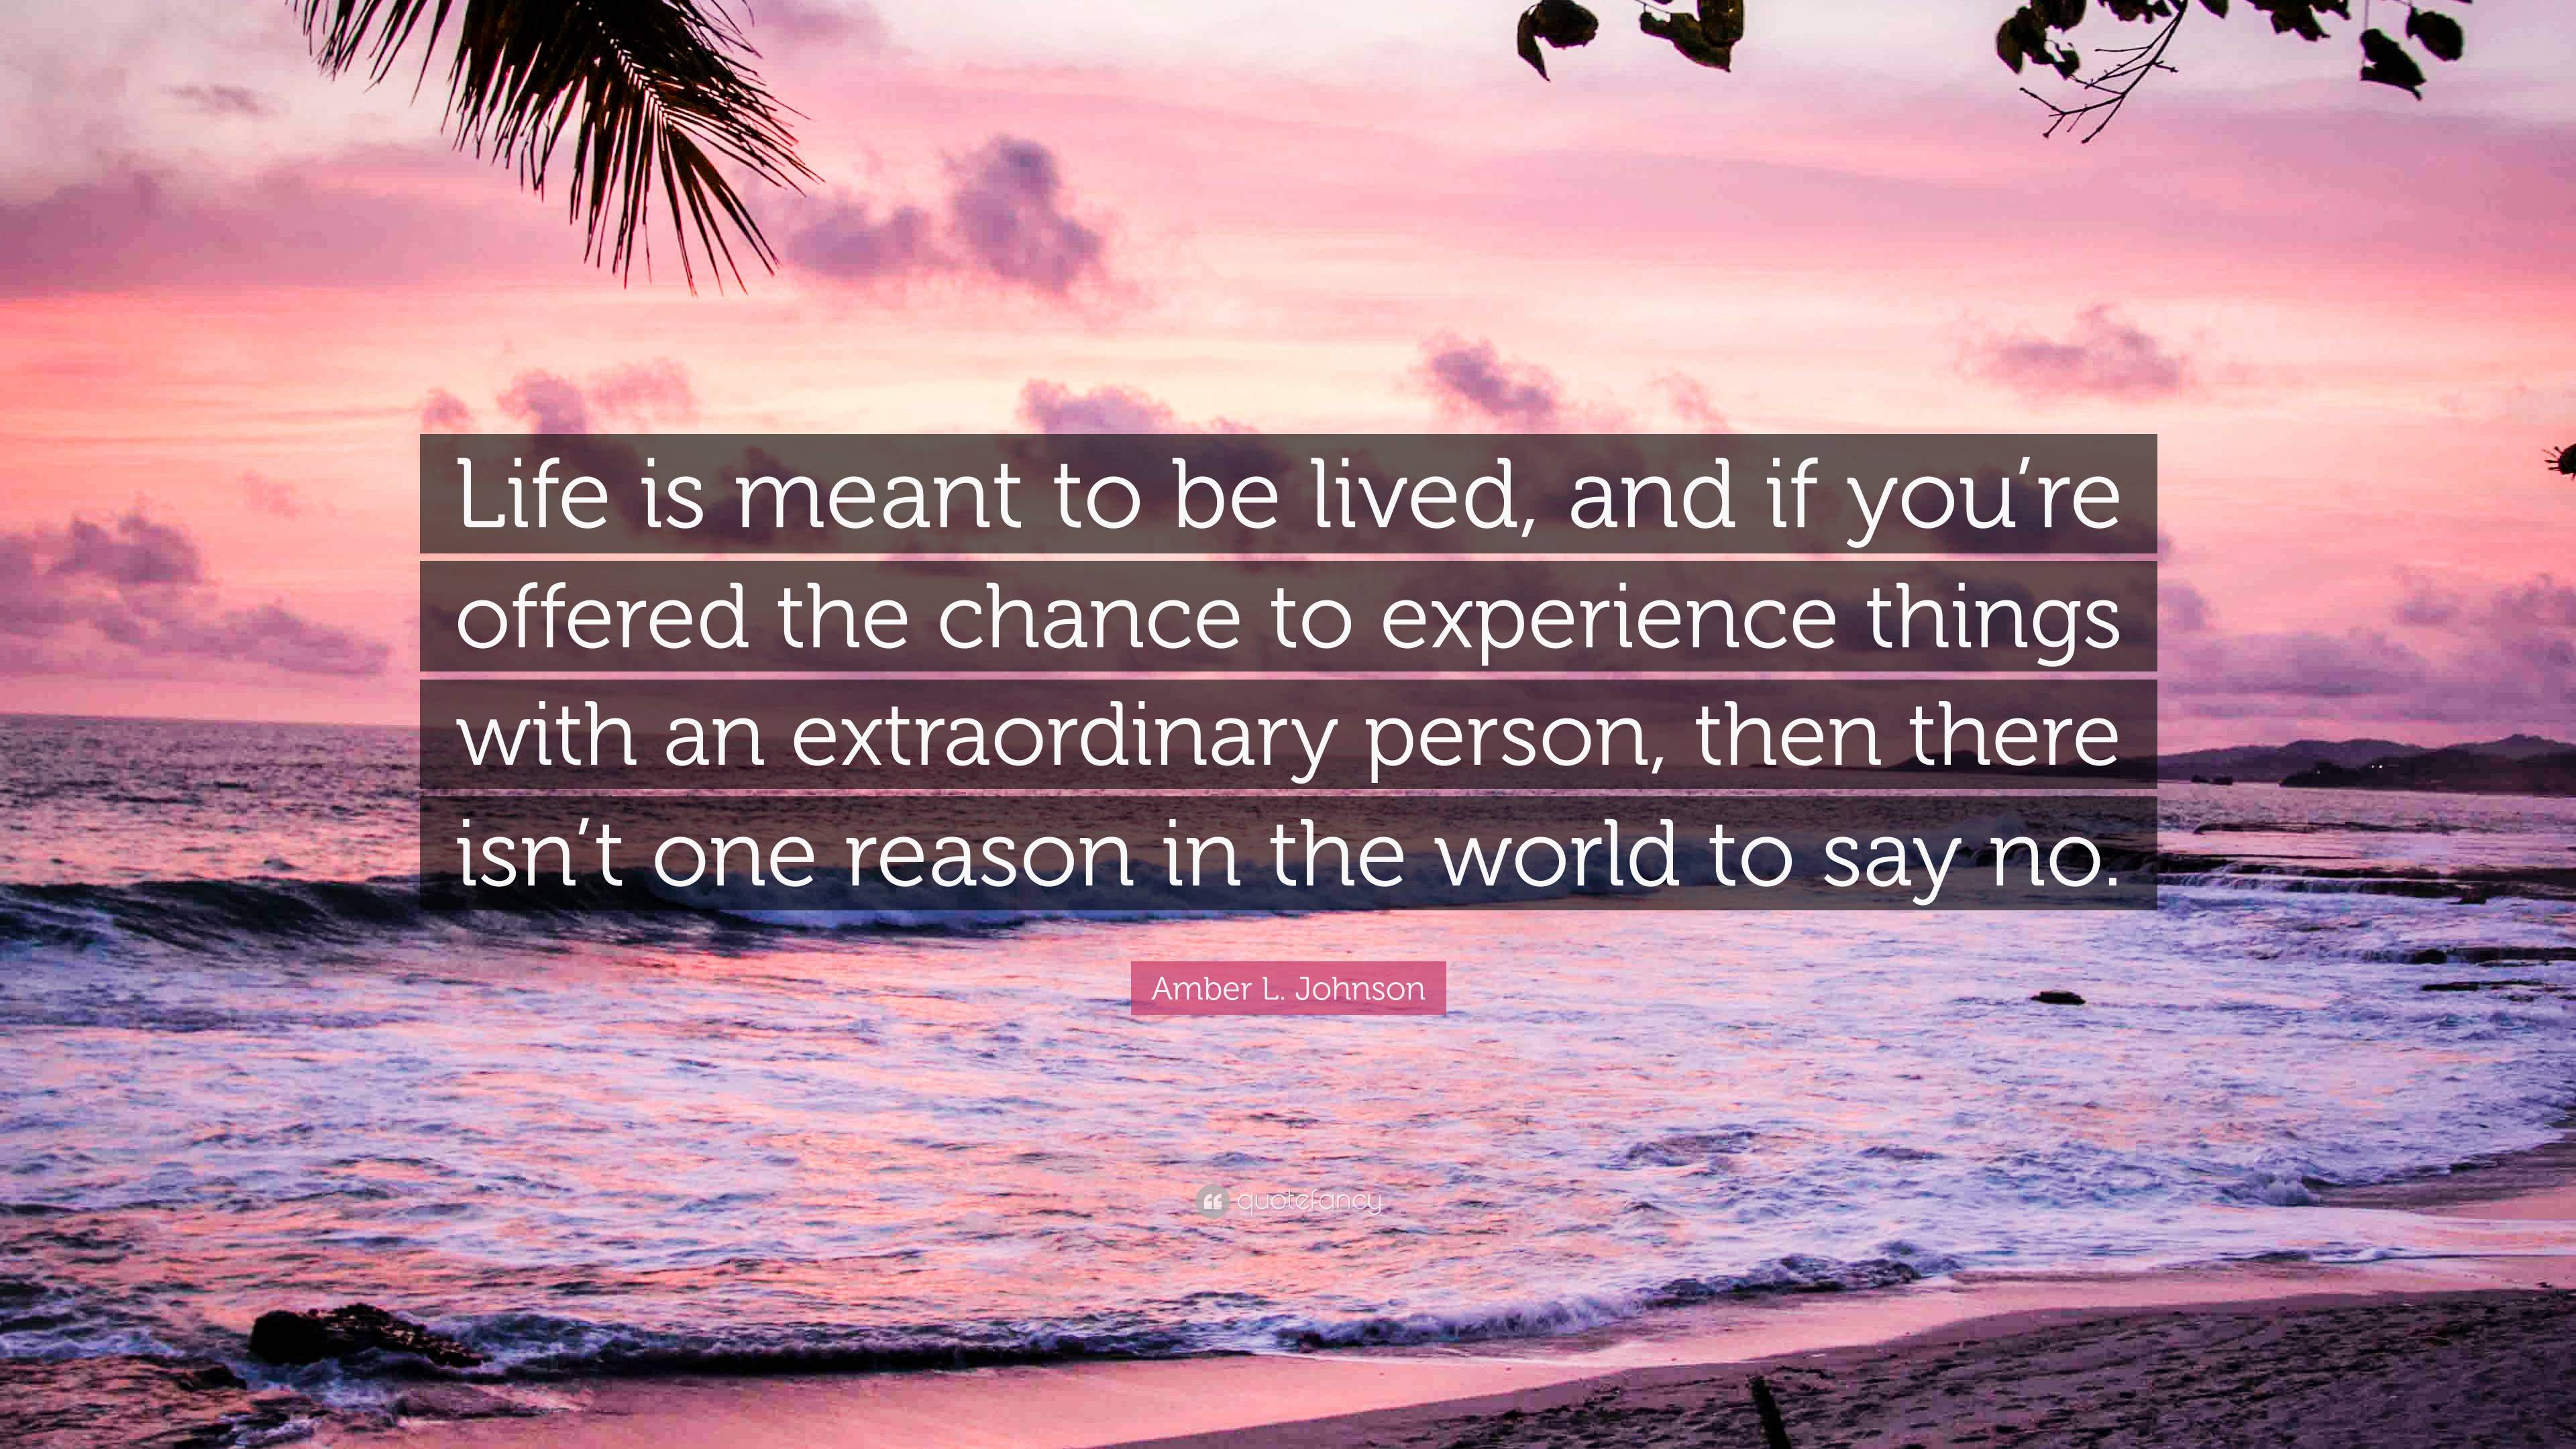 Life is meant to be LIVED.